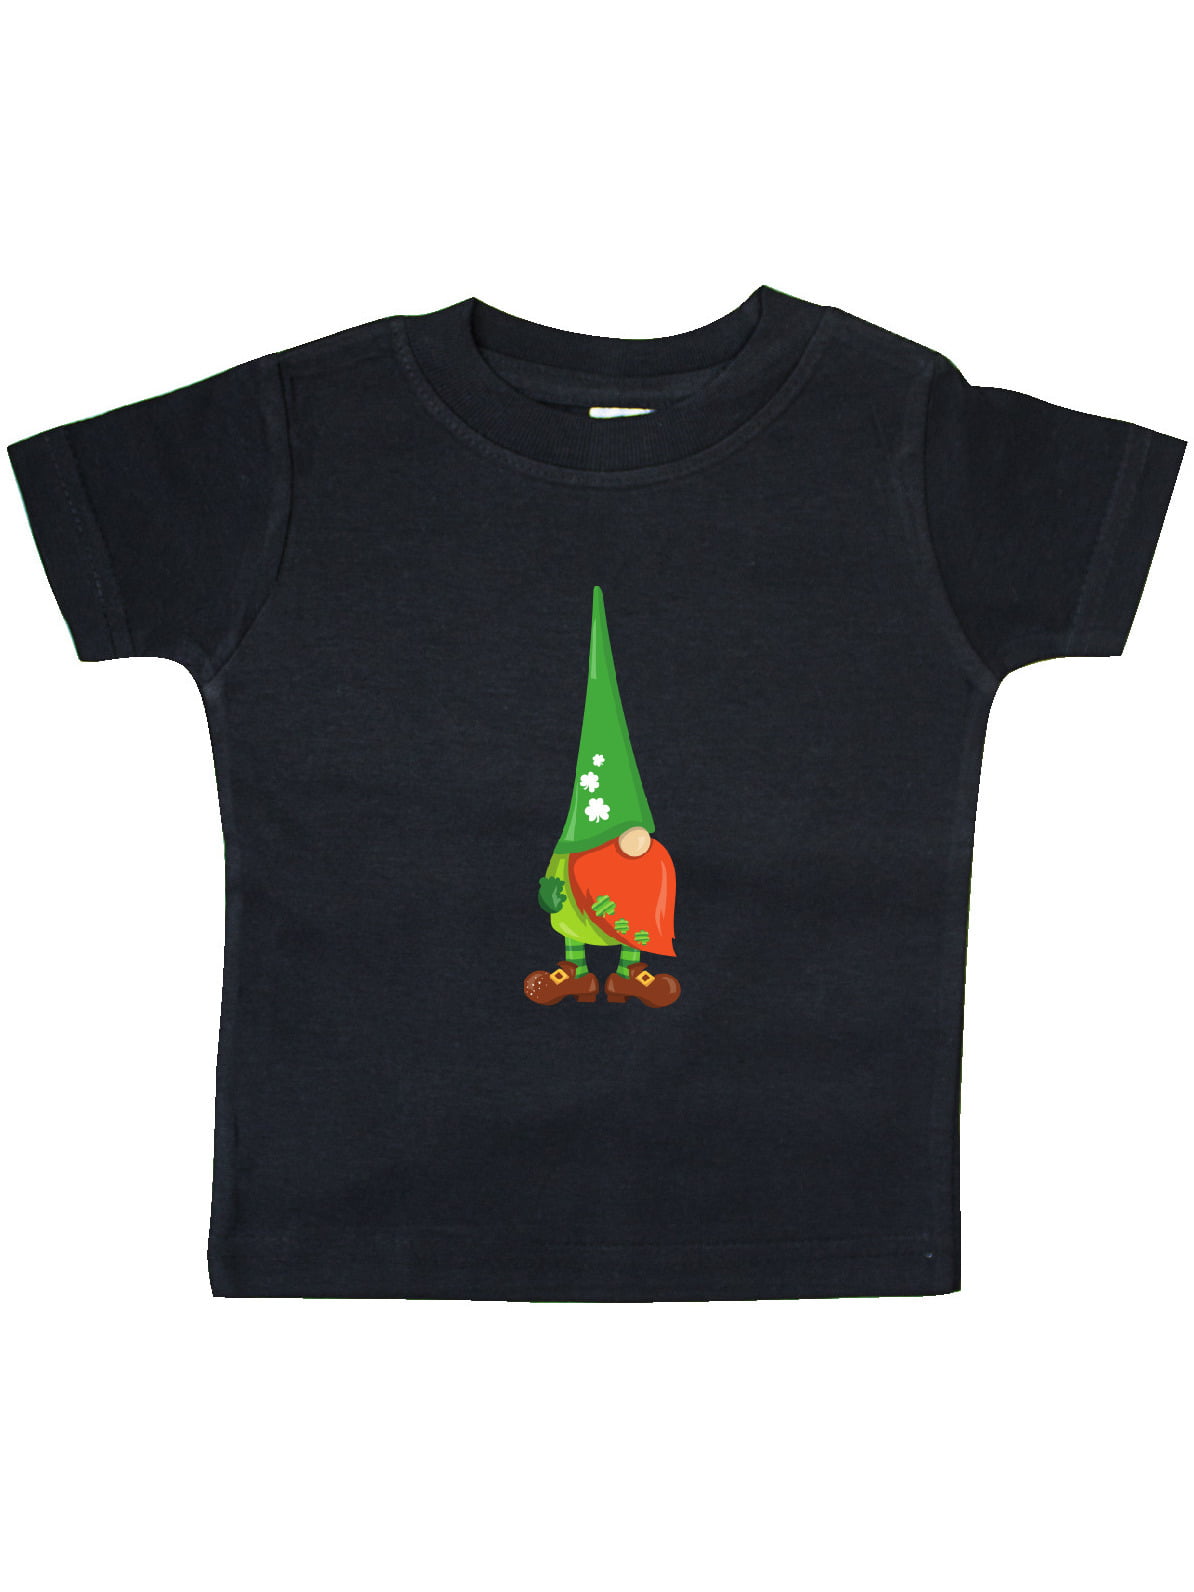 Download Saint Patrick's Day Gnome, Gnome With Green Hat Baby T ...